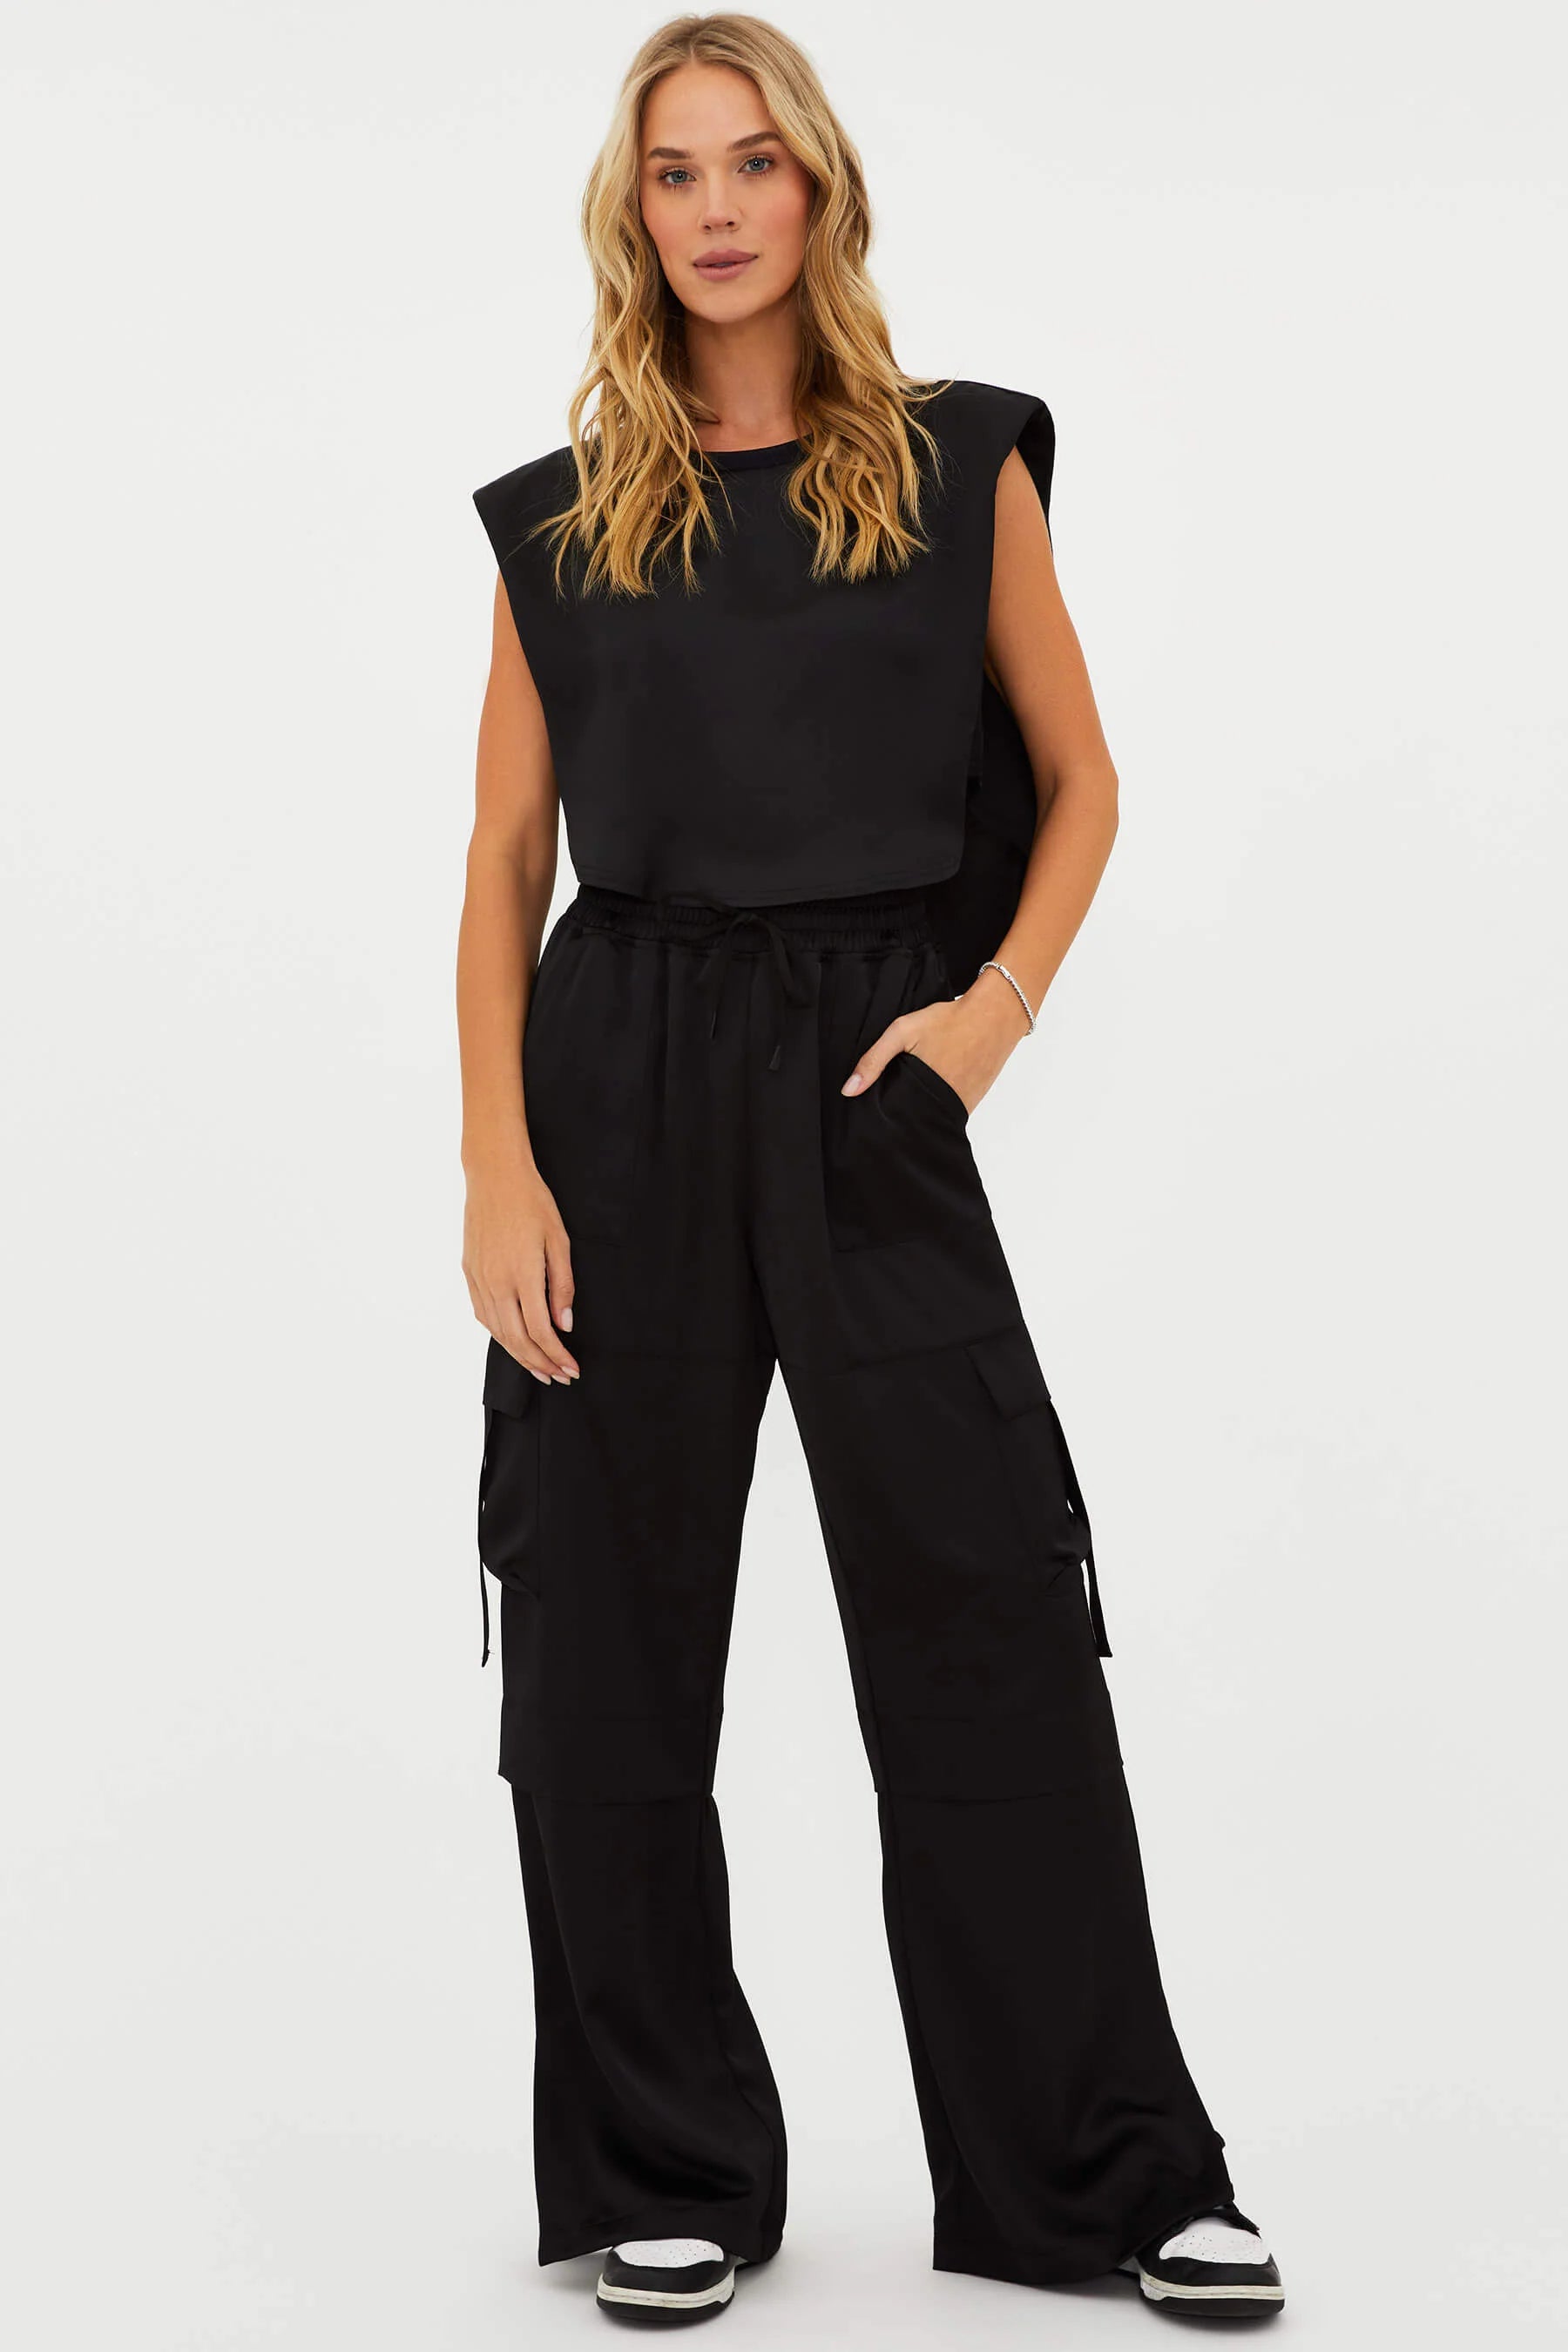 Best Selling Beach Riot Gianna Pant